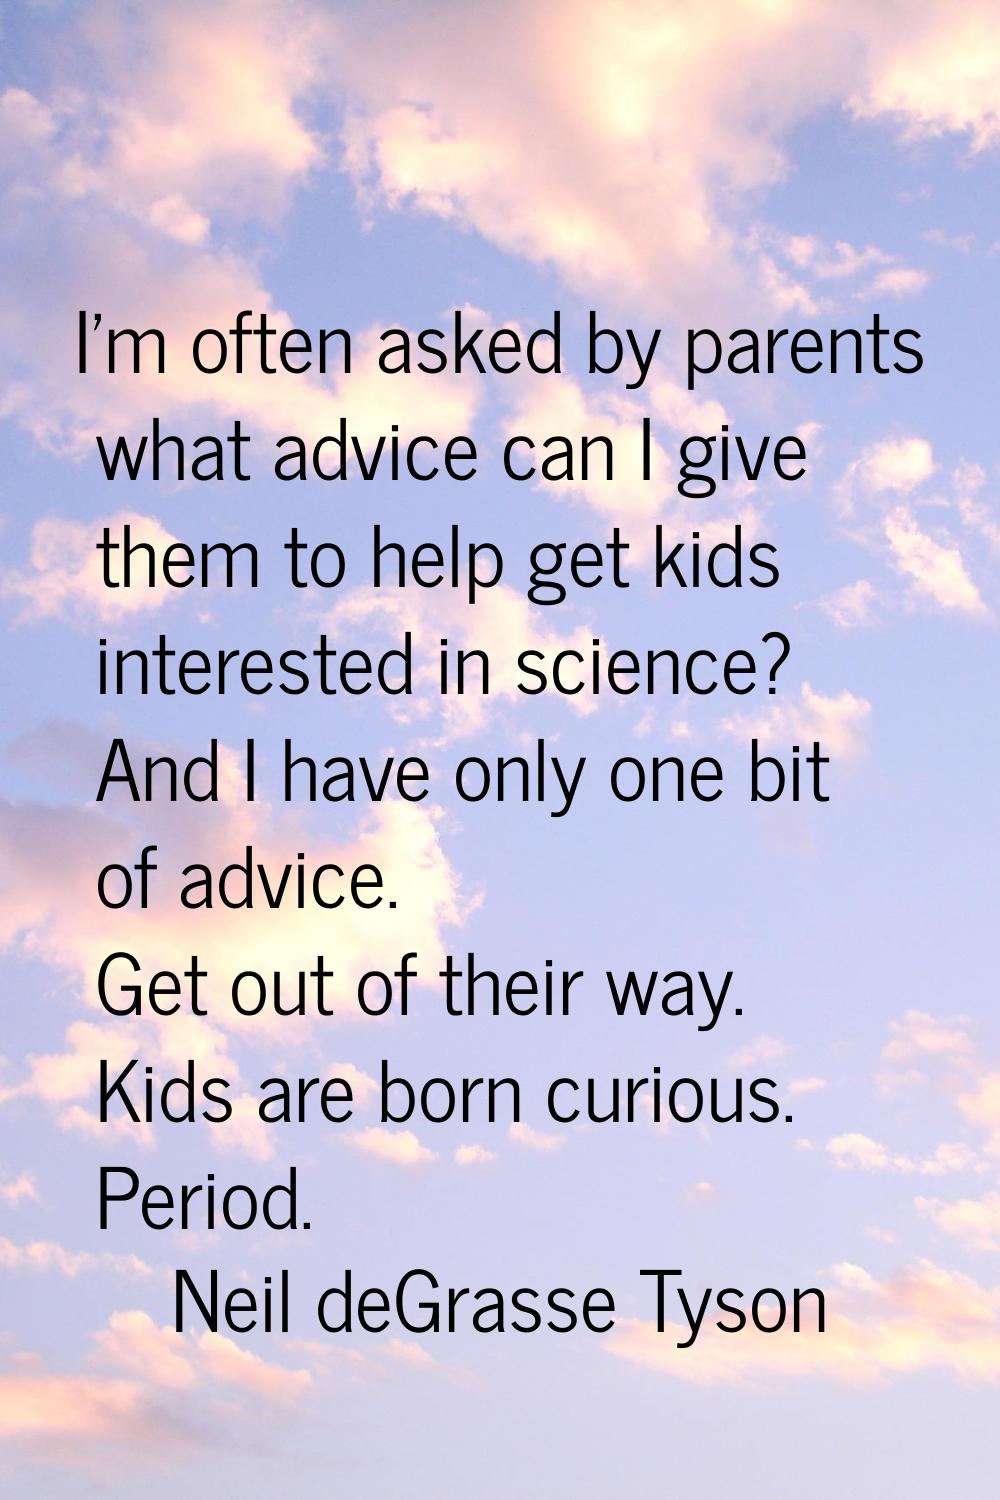 I'm often asked by parents what advice can I give them to help get kids interested in science? And 